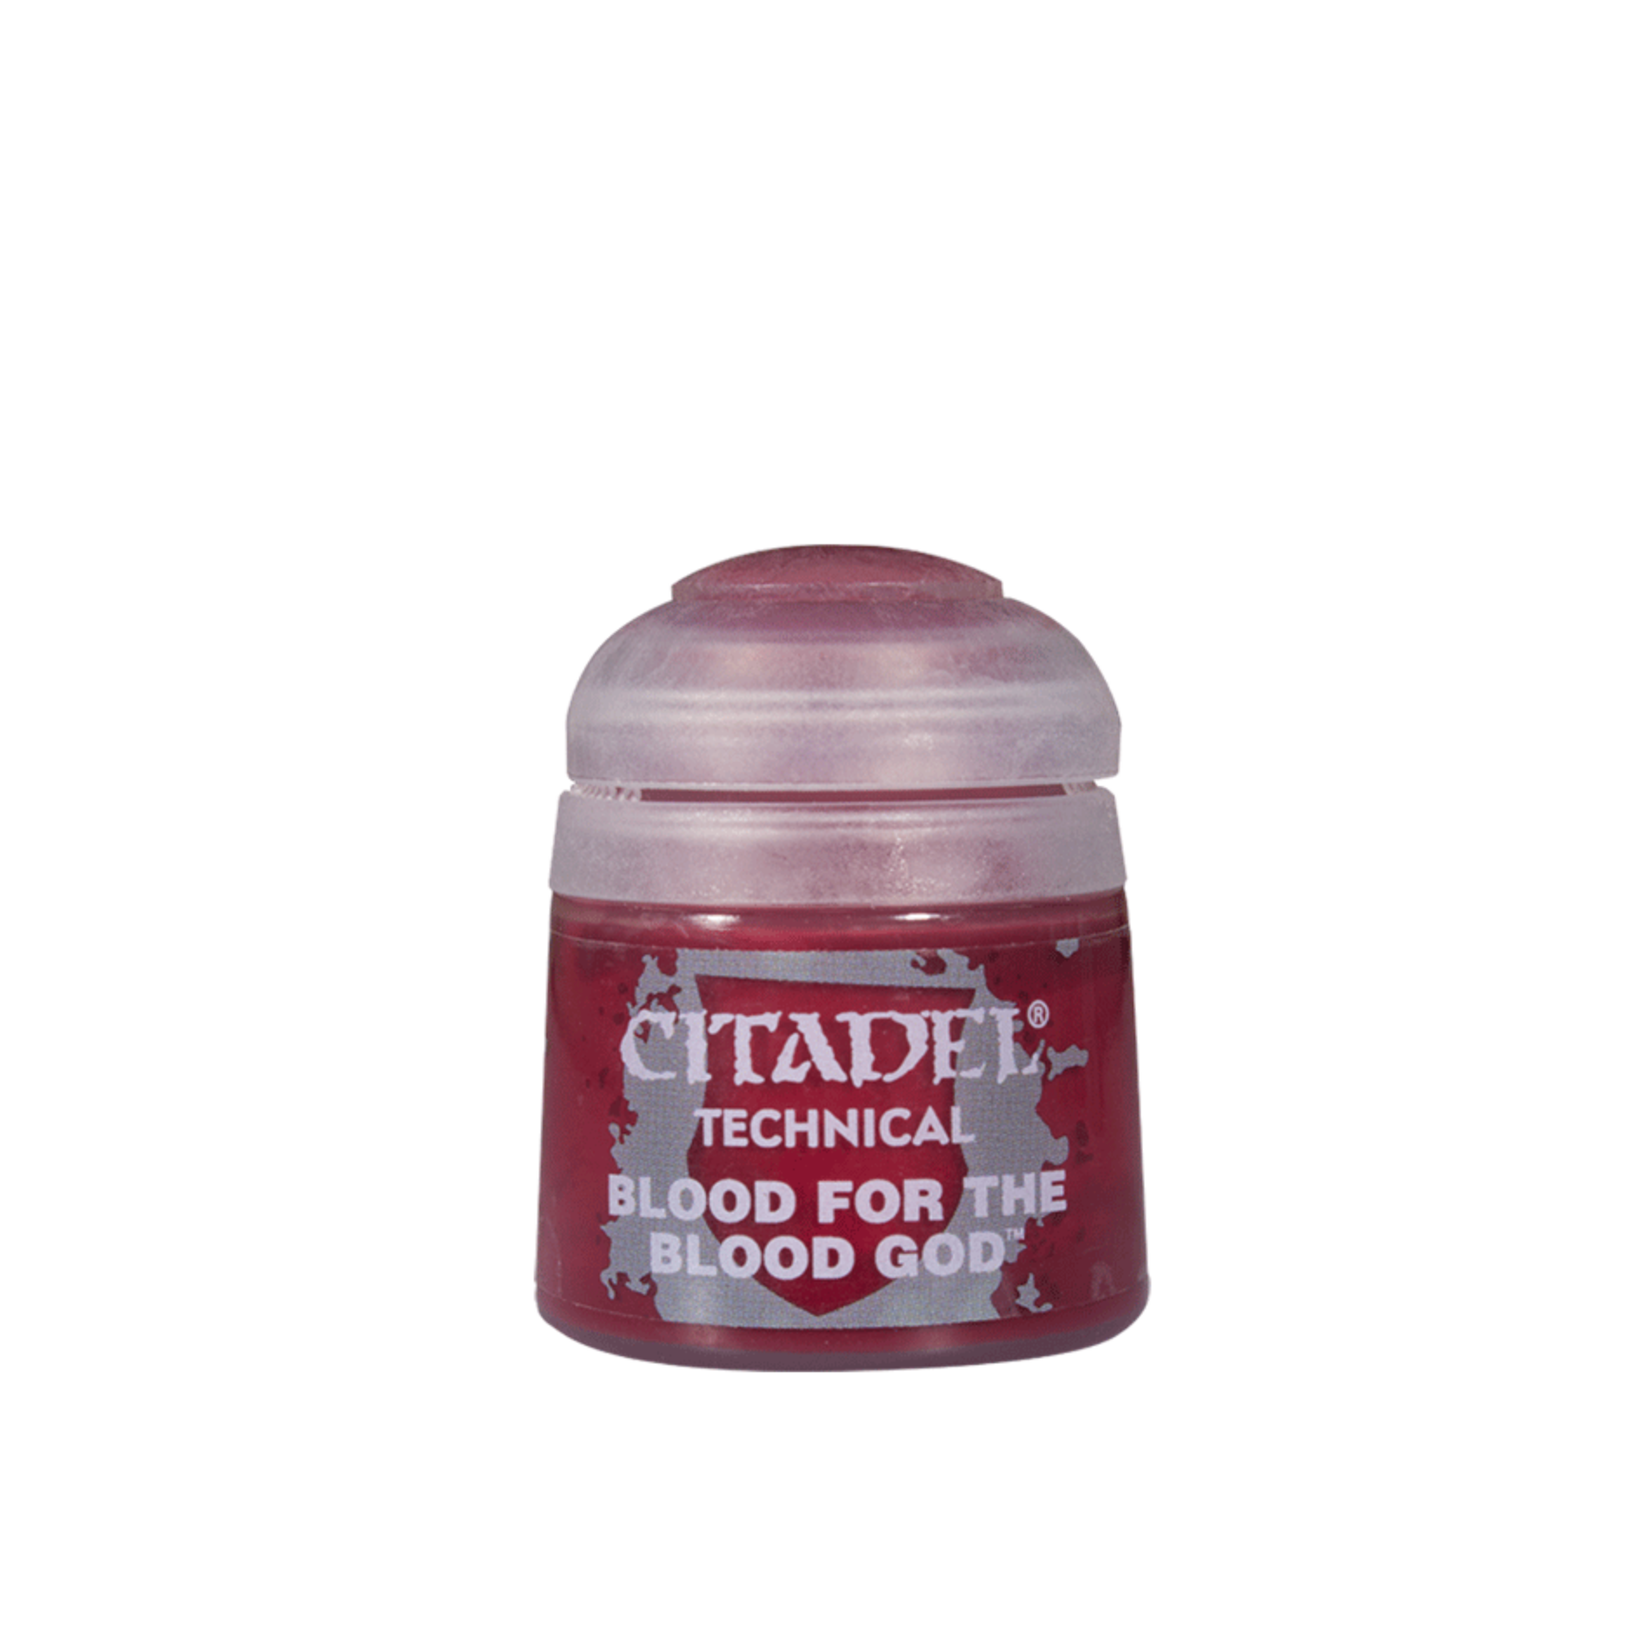 Citadel Blood for the Blood God (Technical 12ml)